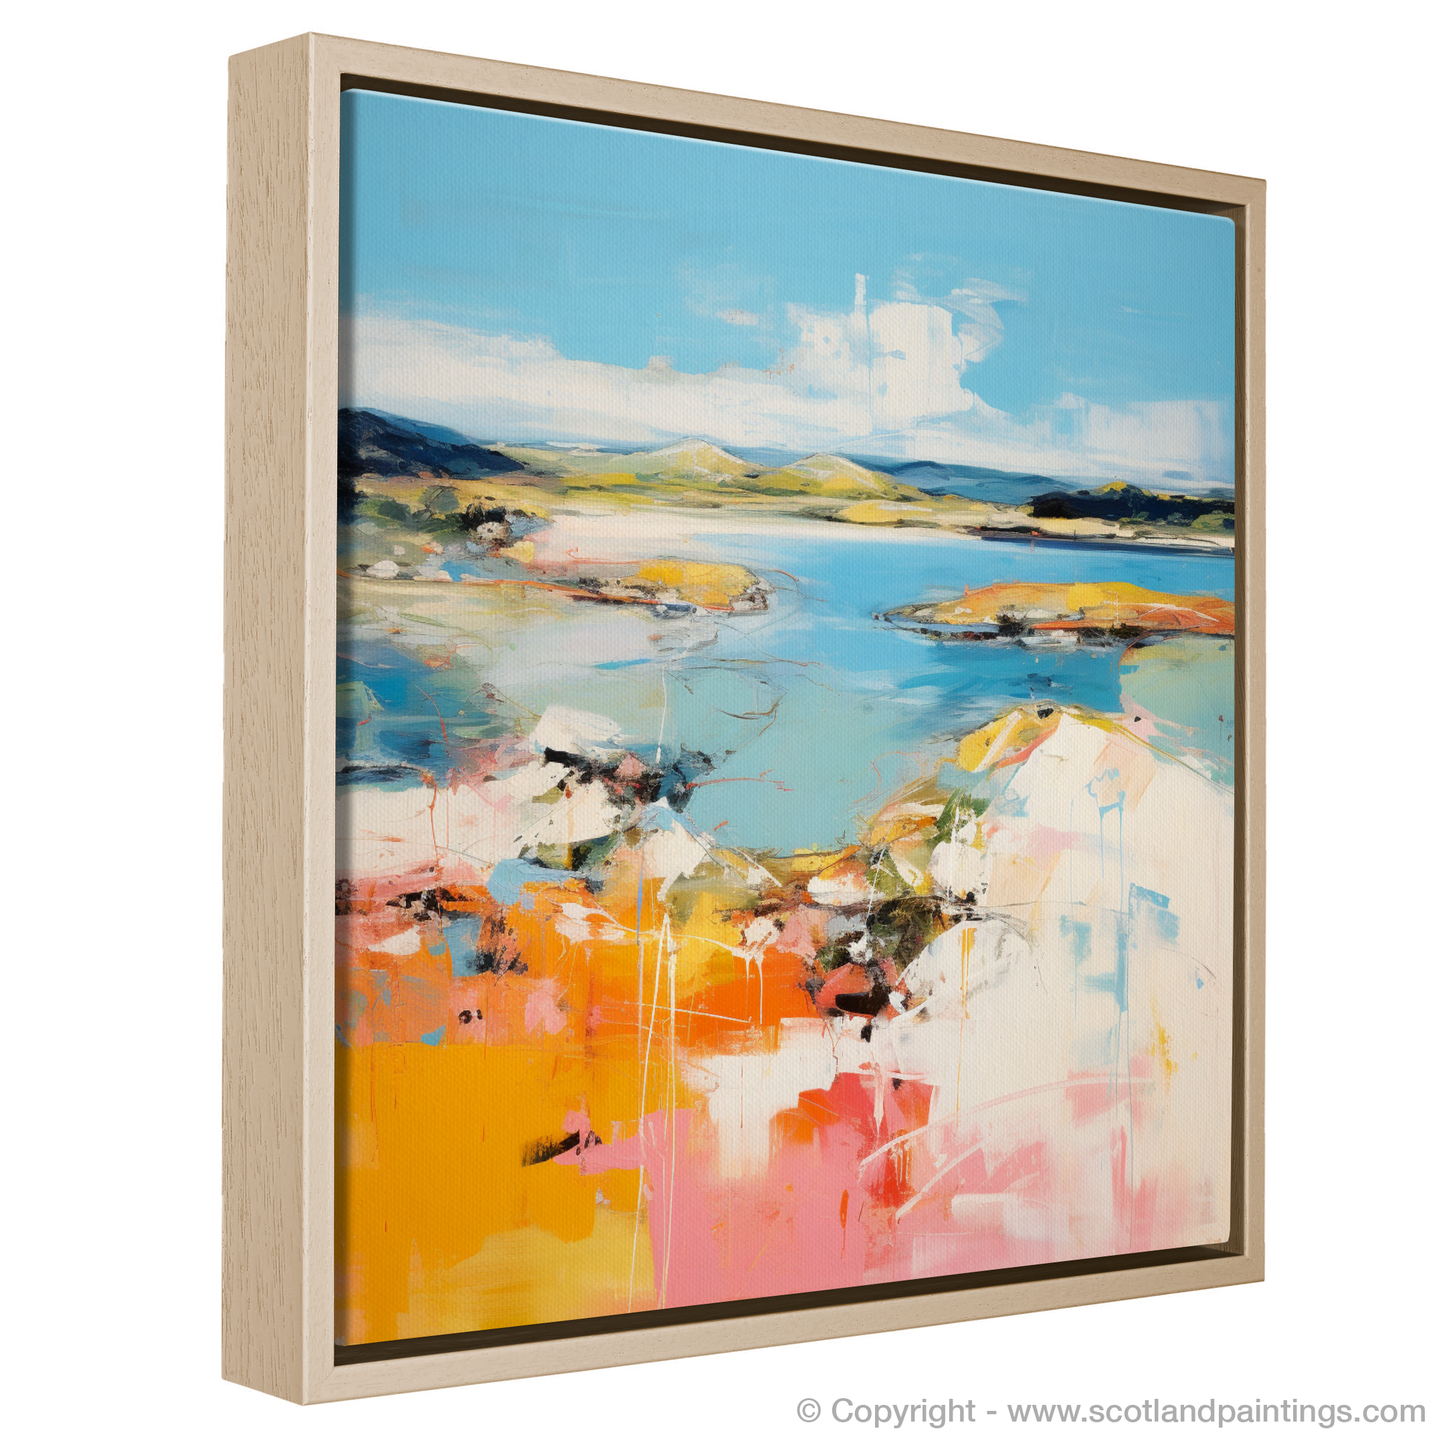 Painting and Art Print of Isle of Gigha, Inner Hebrides in summer entitled "Isle of Gigha Summer Essence".